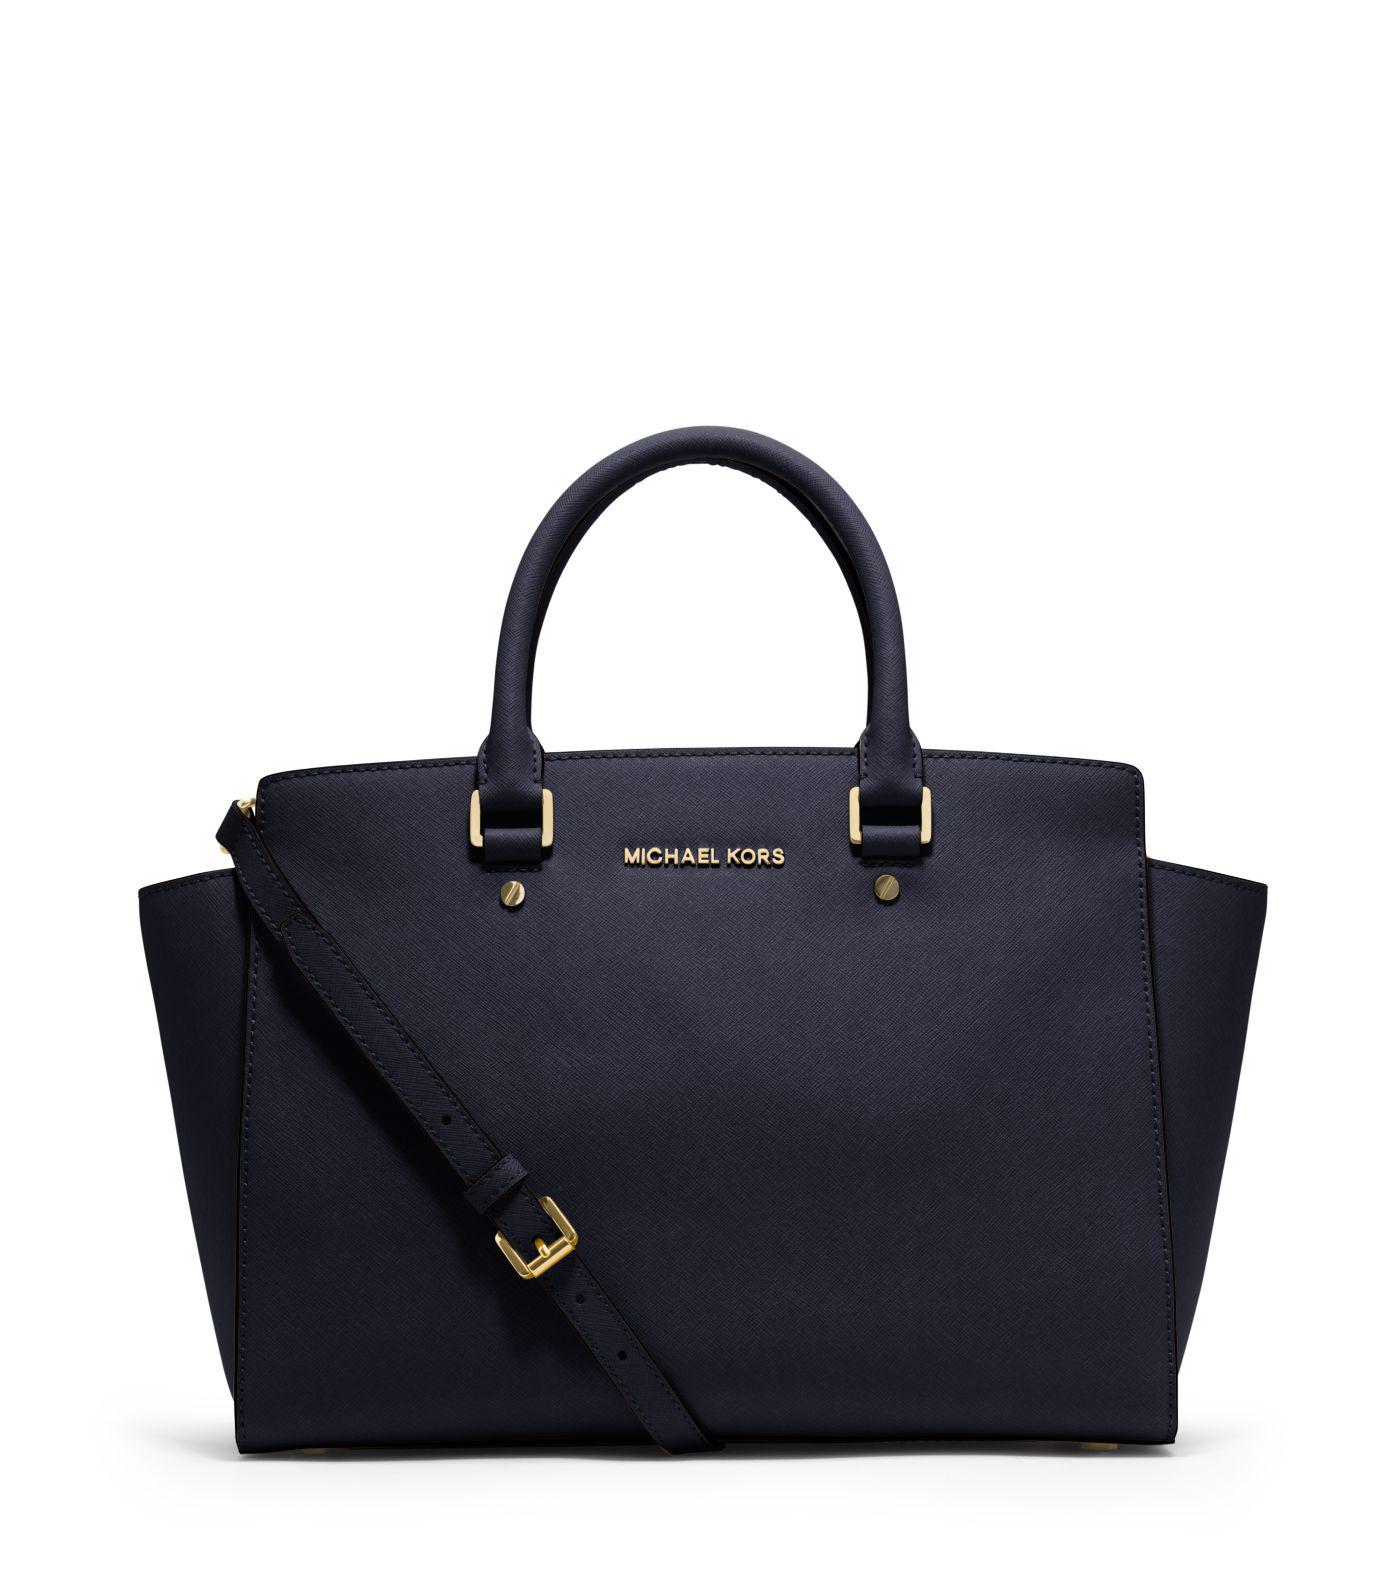 Michael Kors Selma Large Saffiano Leather Satchel in Navy (Blue) Lyst